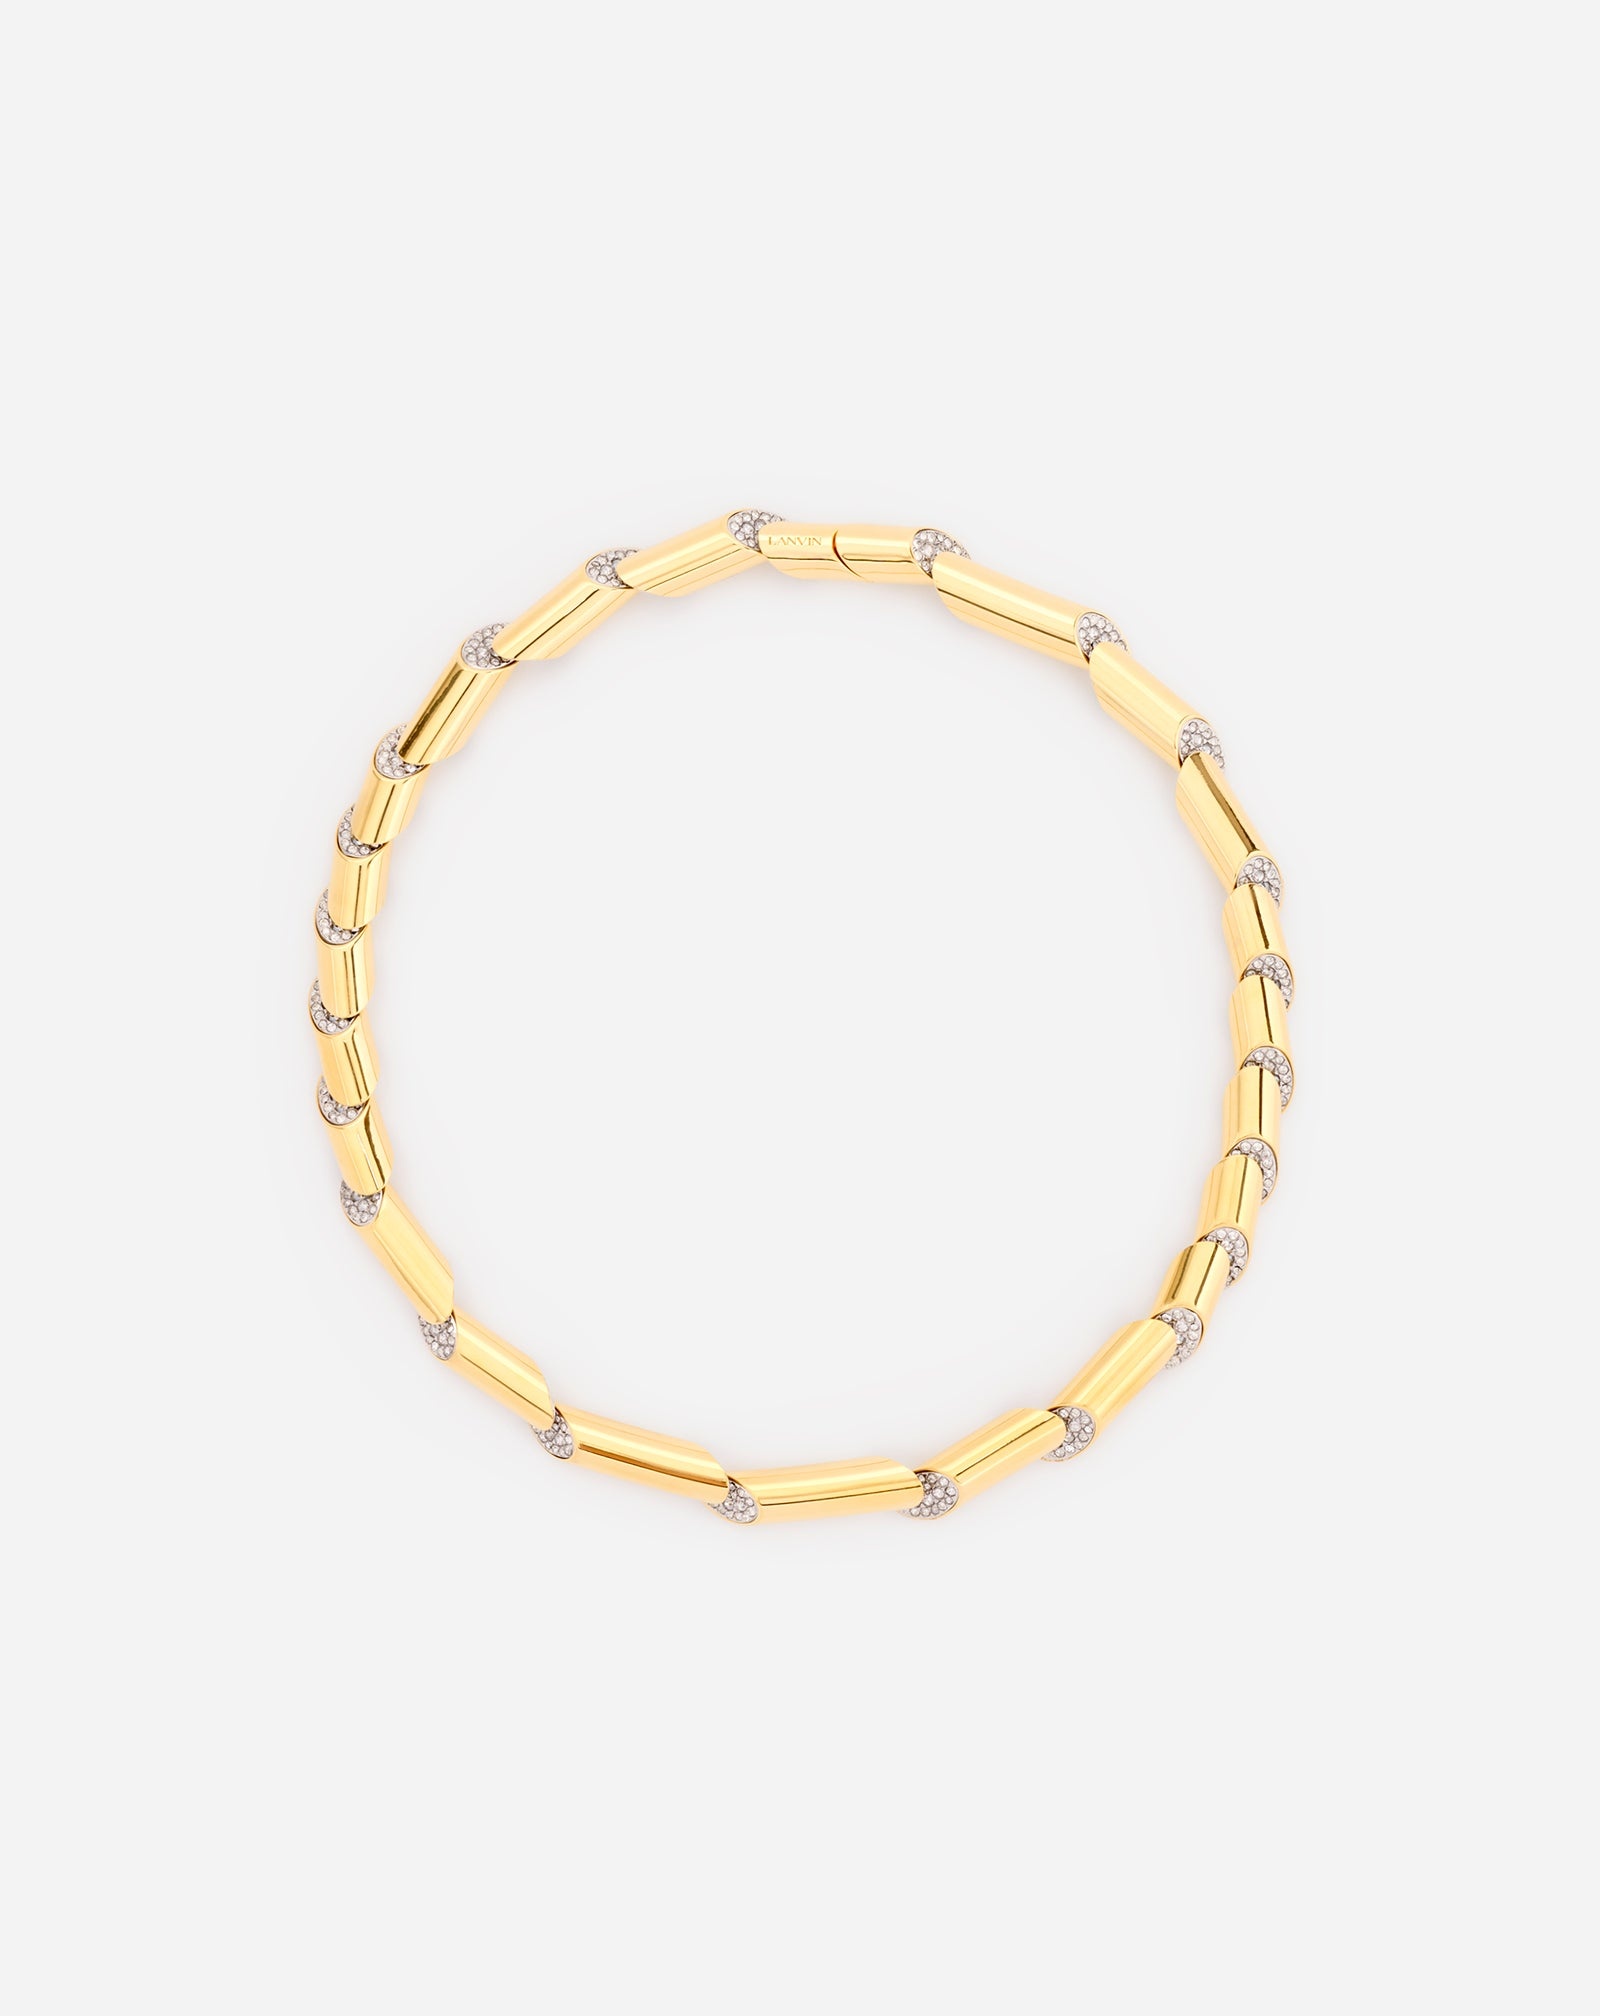 SEQUENCE BY LANVIN RHINESTONE CHOKER NECKLACE - 1